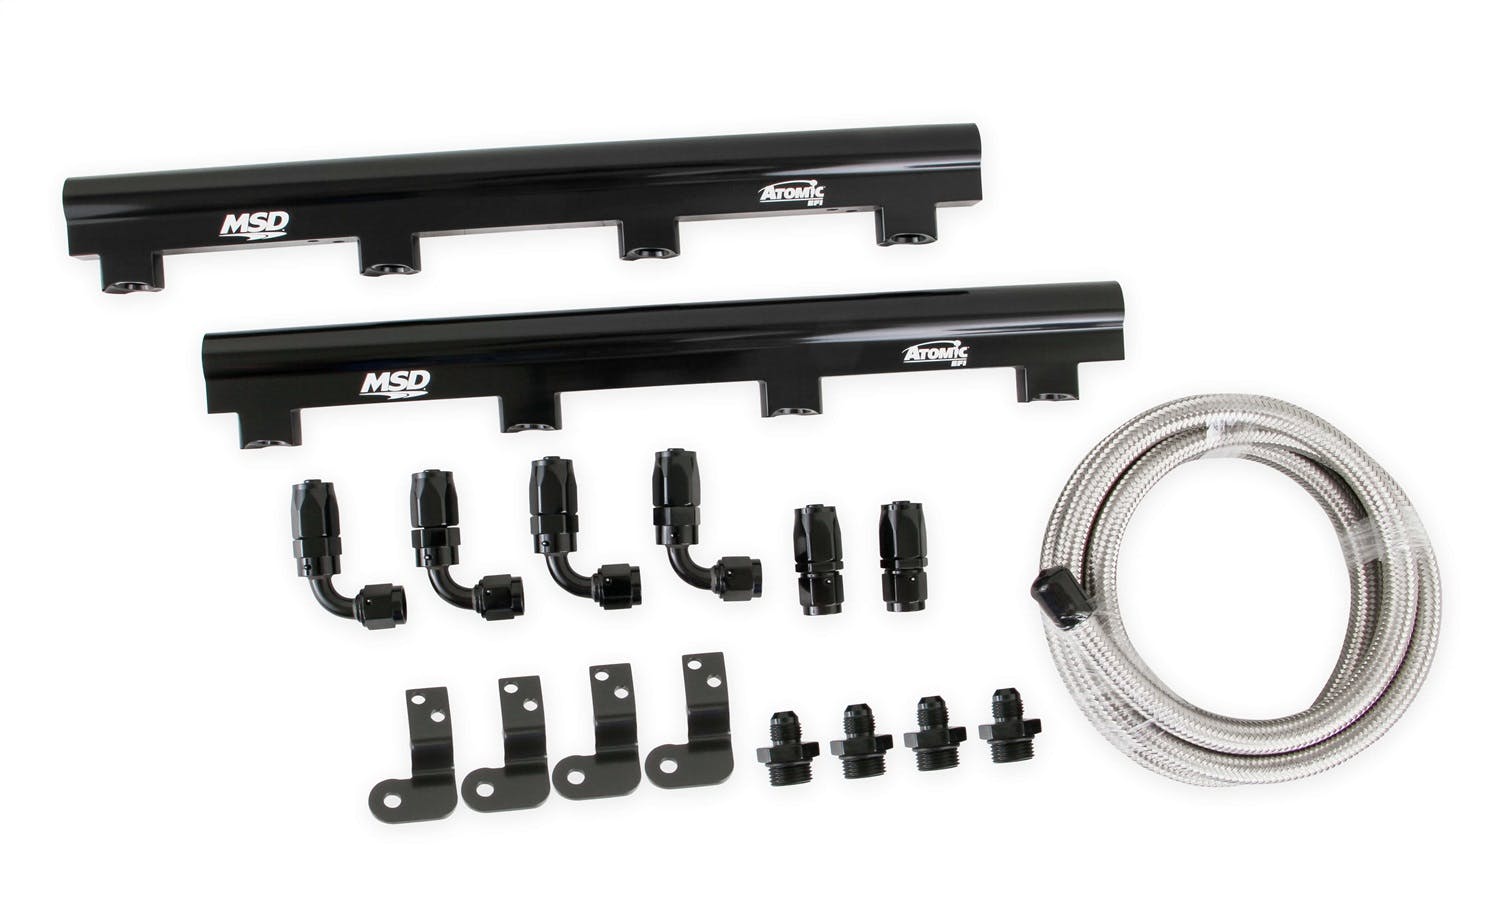 MSD Performance 2723 Fuel Rail Kit for LS7 Airforce Manifold